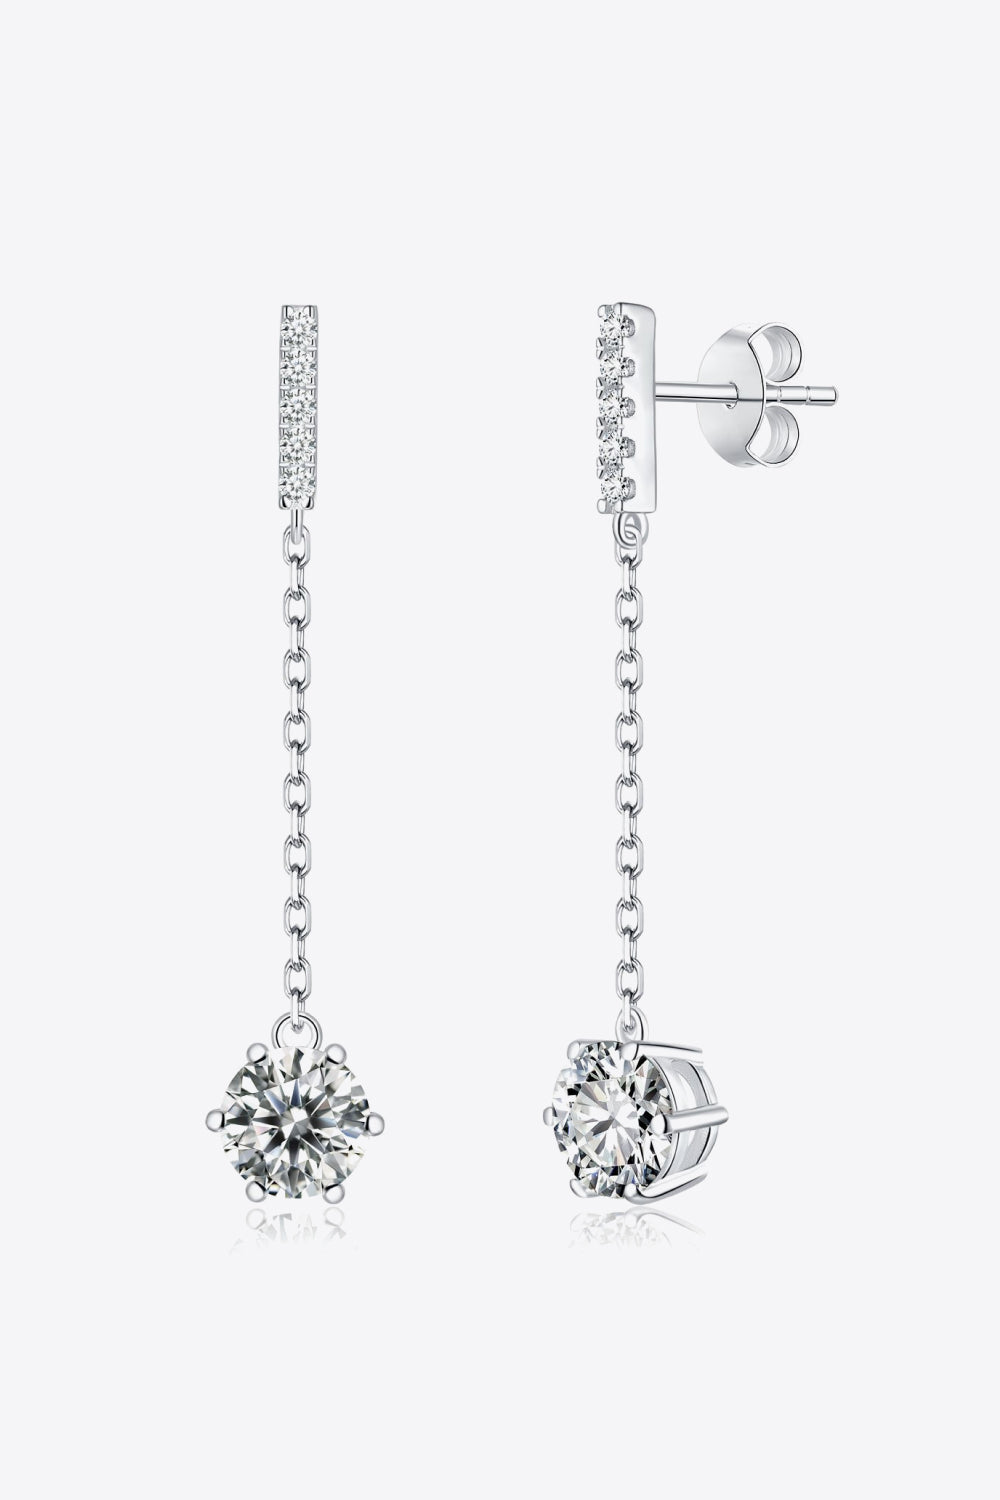 6-Prong Round Moissanite Drop Earrings - Dash Trend